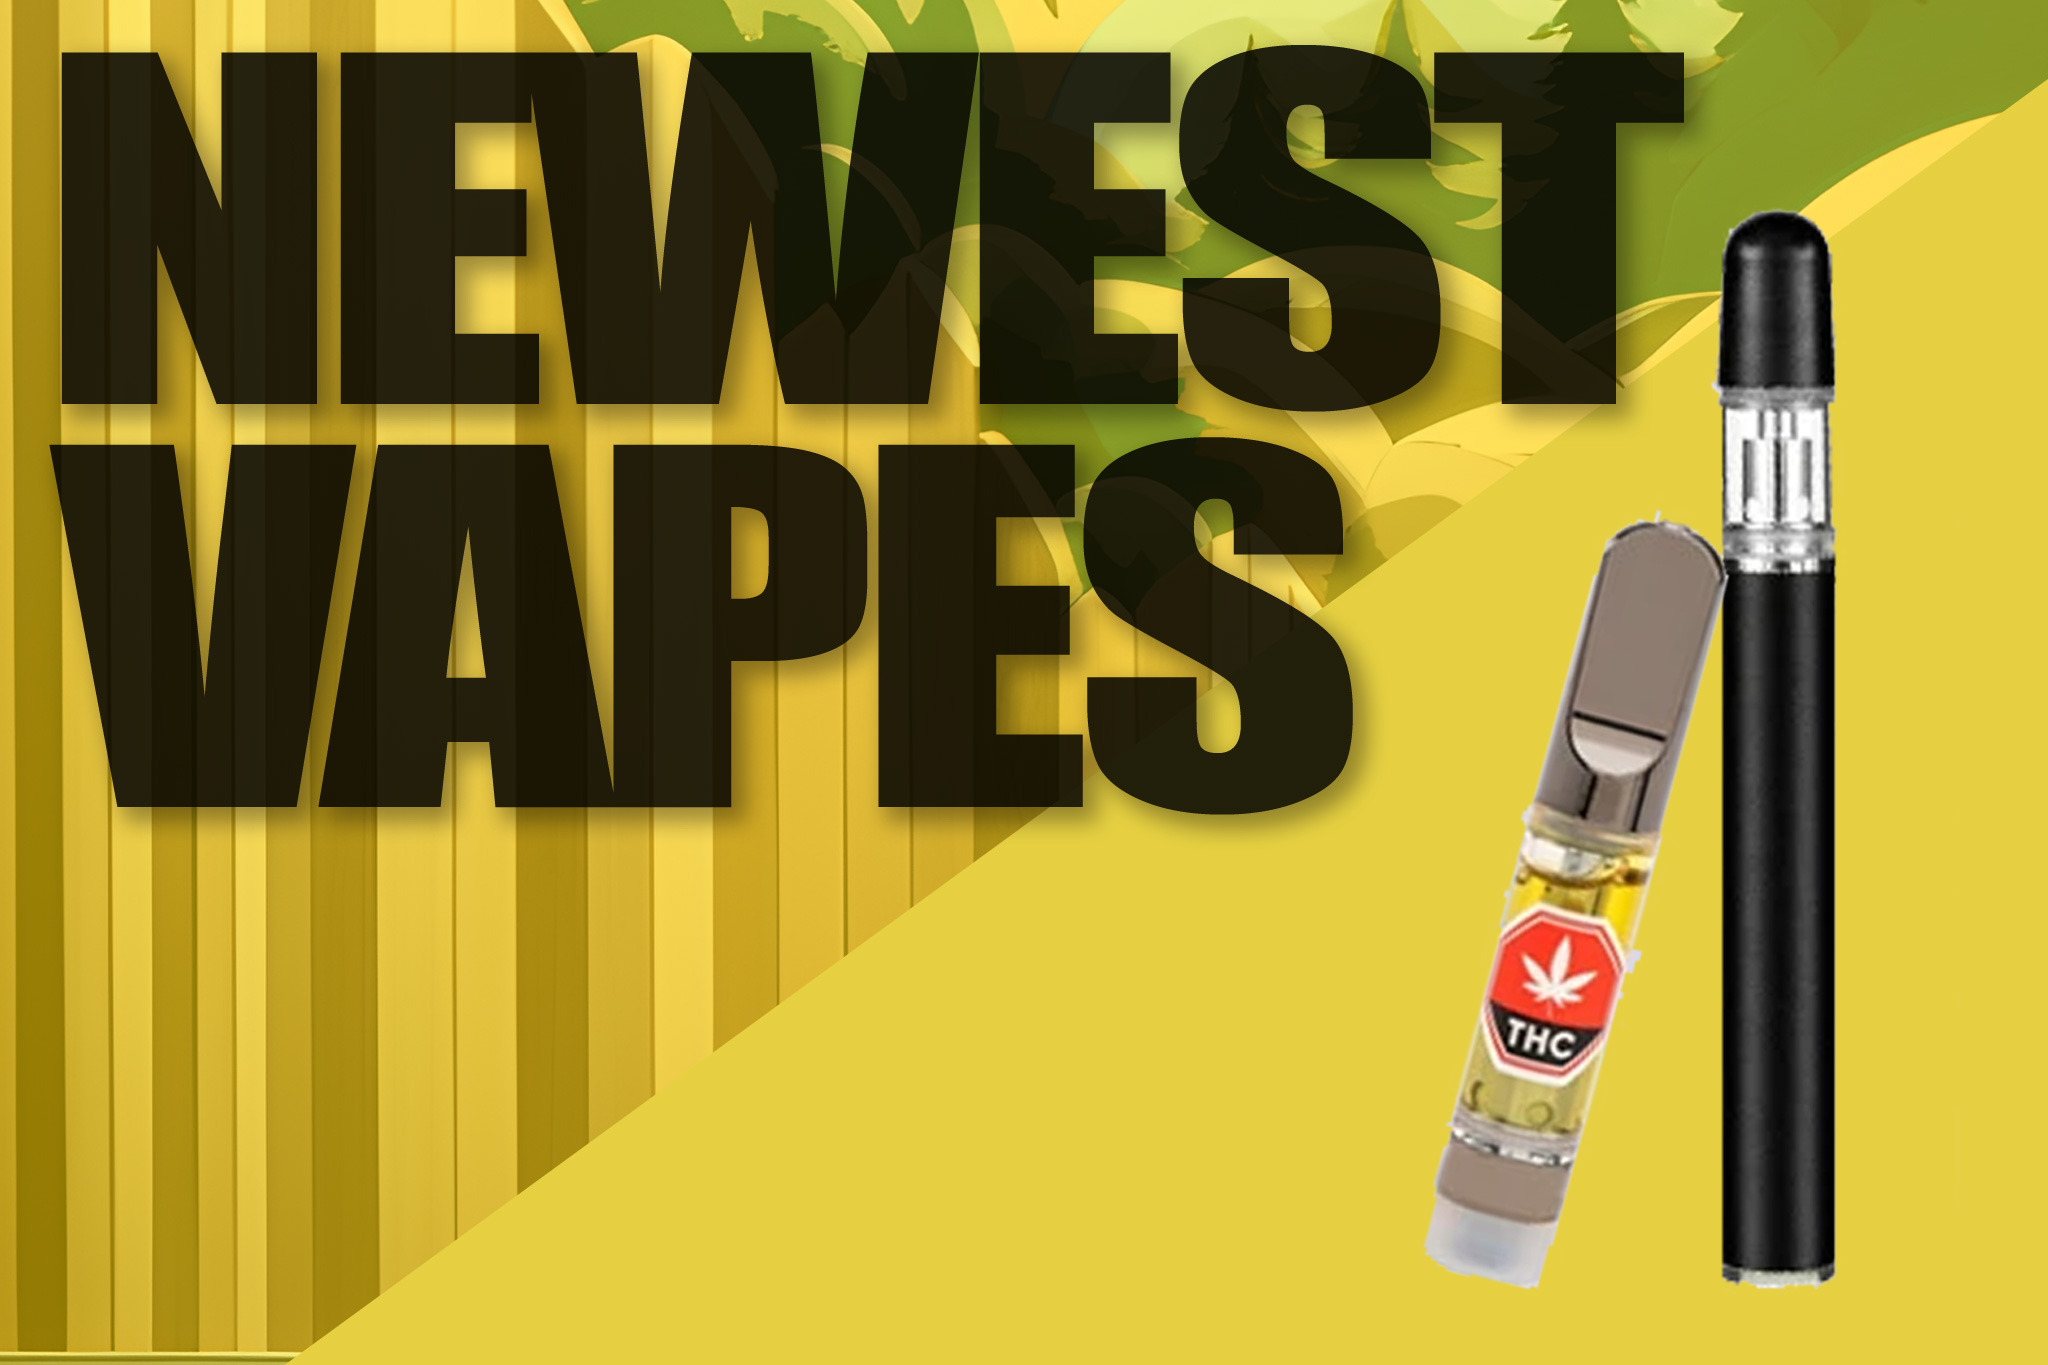 Newest Vapes at cannabis Pineapple Victoria